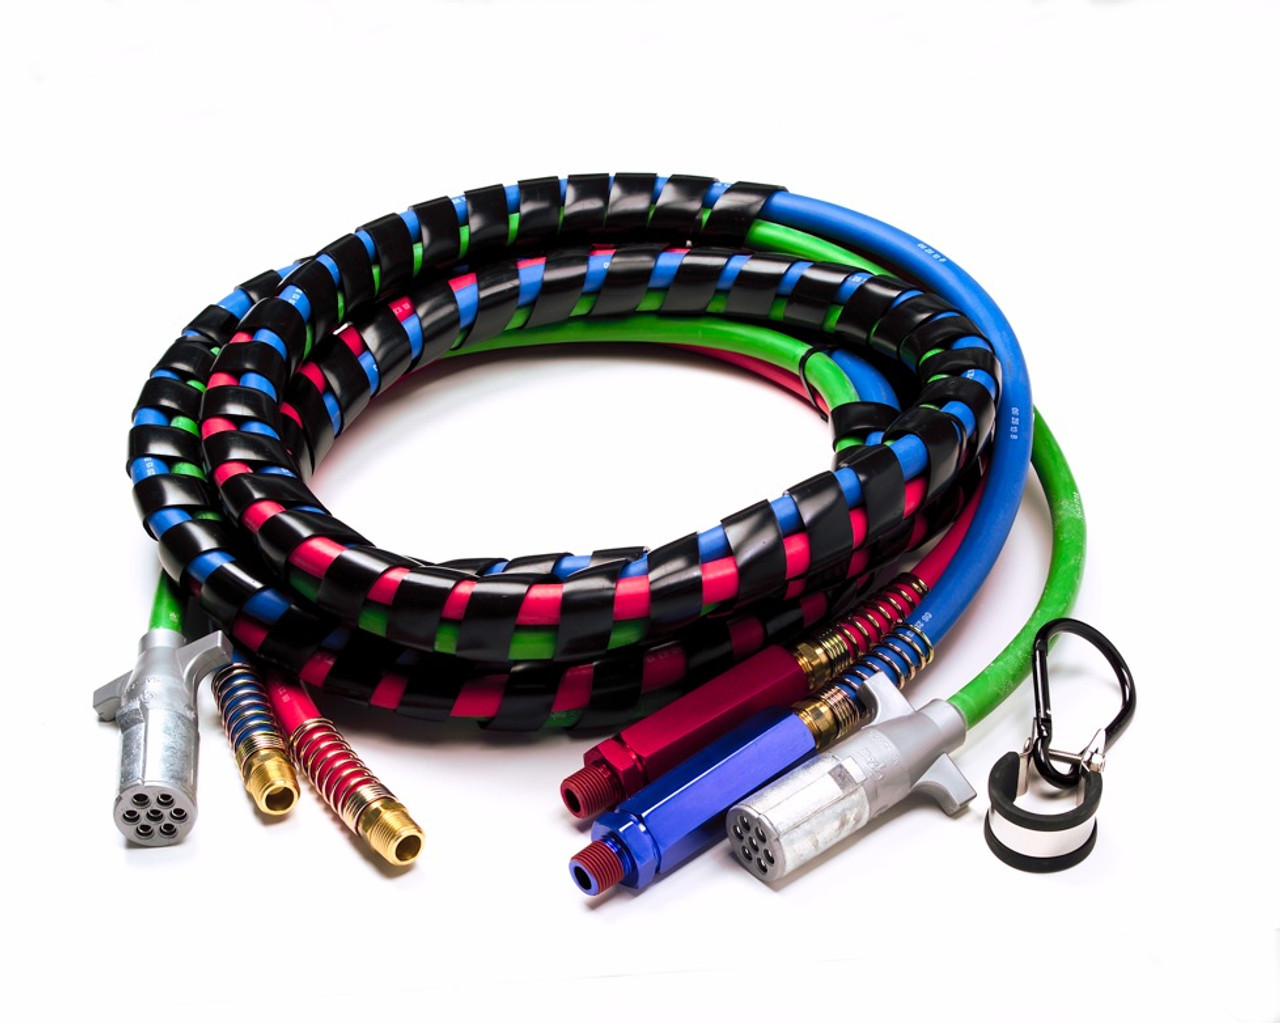 15' ABS Electrical Lead & Two Red/Blue Air Lines w/Red & Blue Anodized Grips - Red/Blue  81-3215